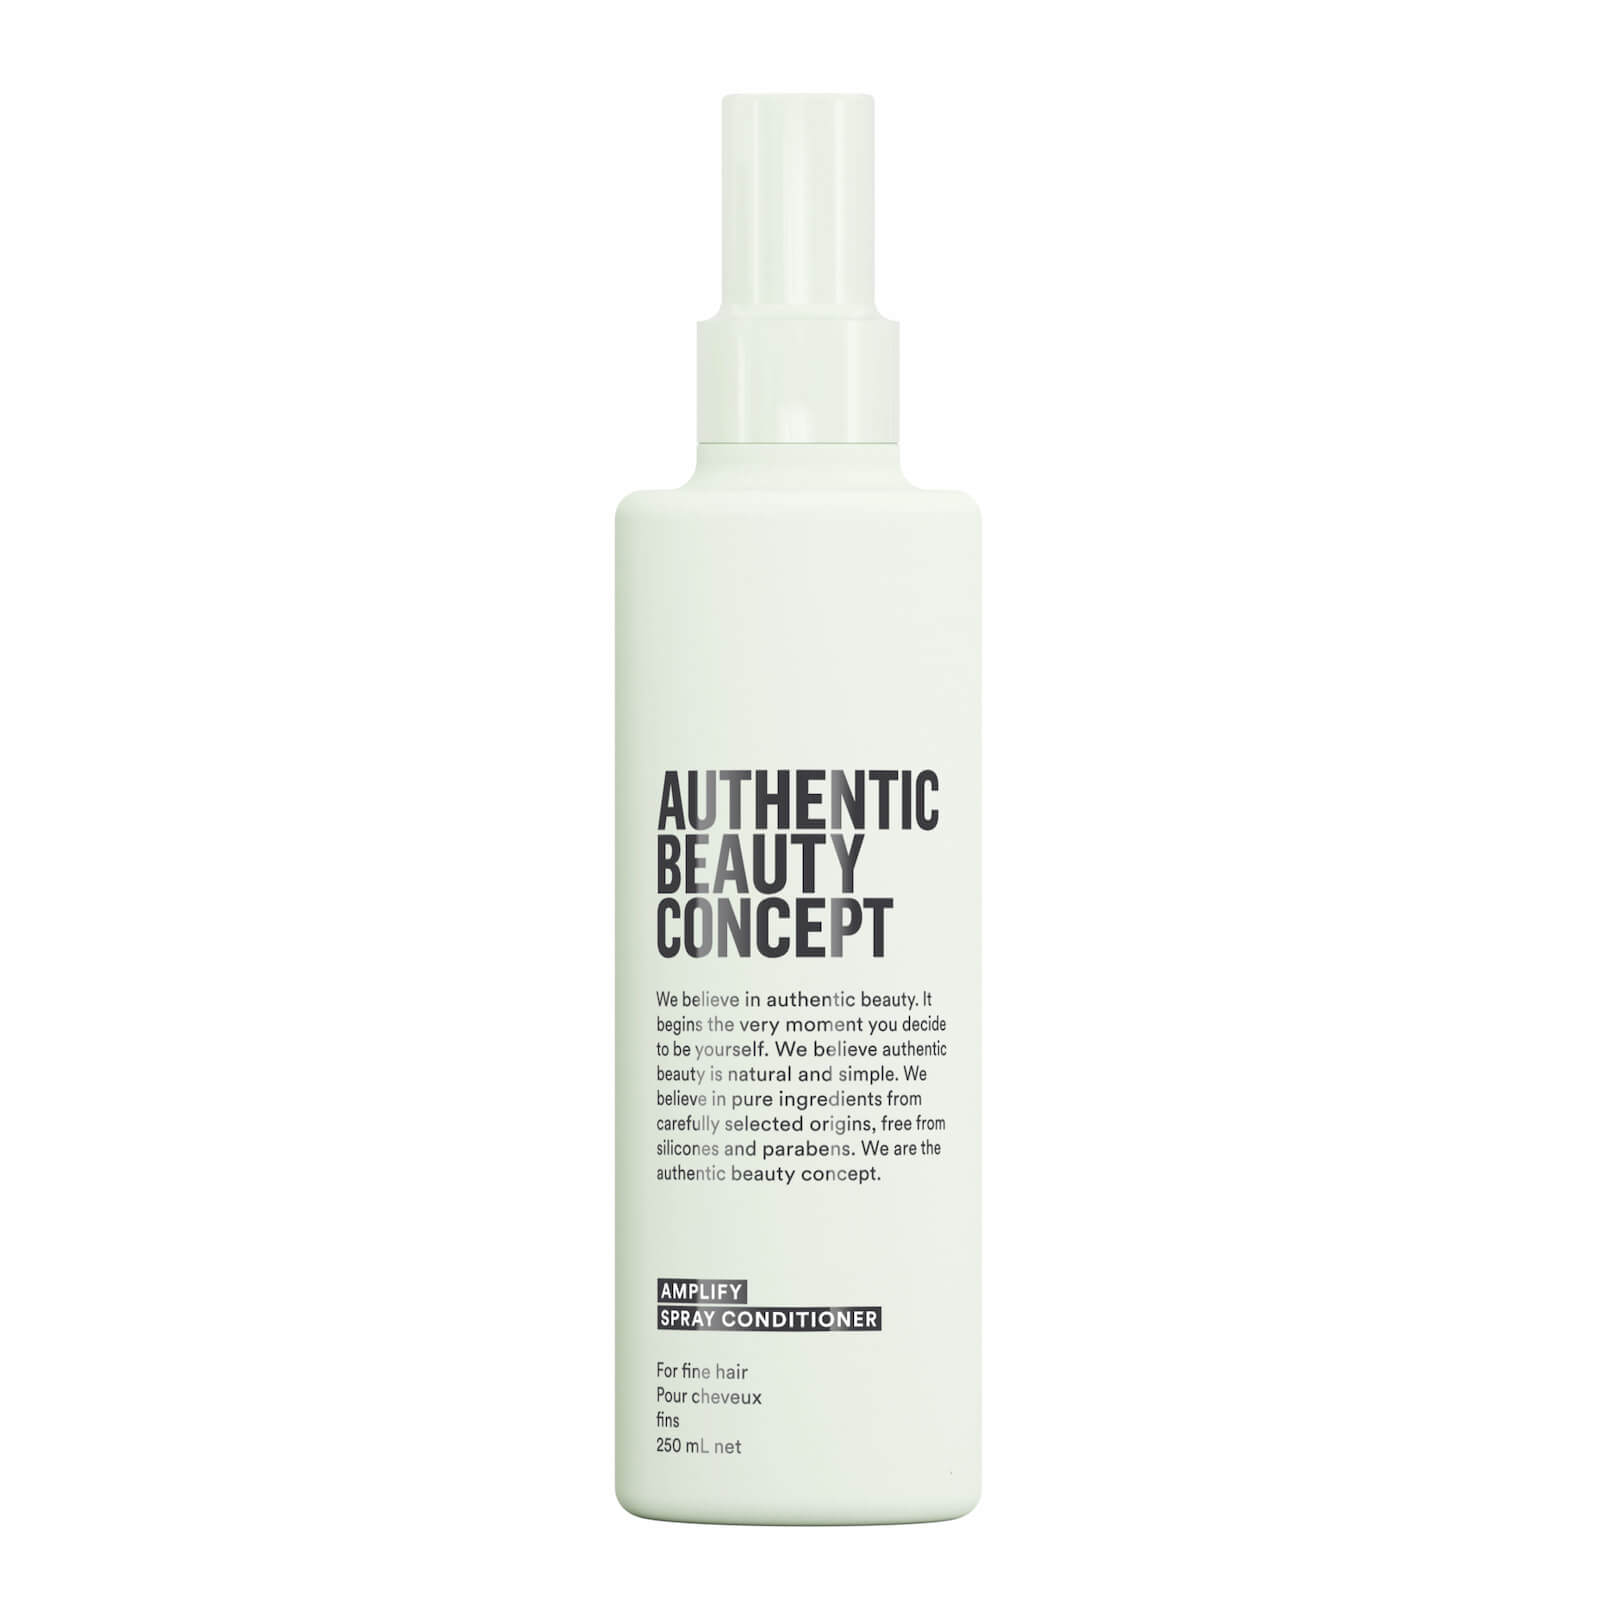 Authentic Beauty Concept Amplify Spray Conditioner 250ml BUY ONLINE North  Laine Hair Co